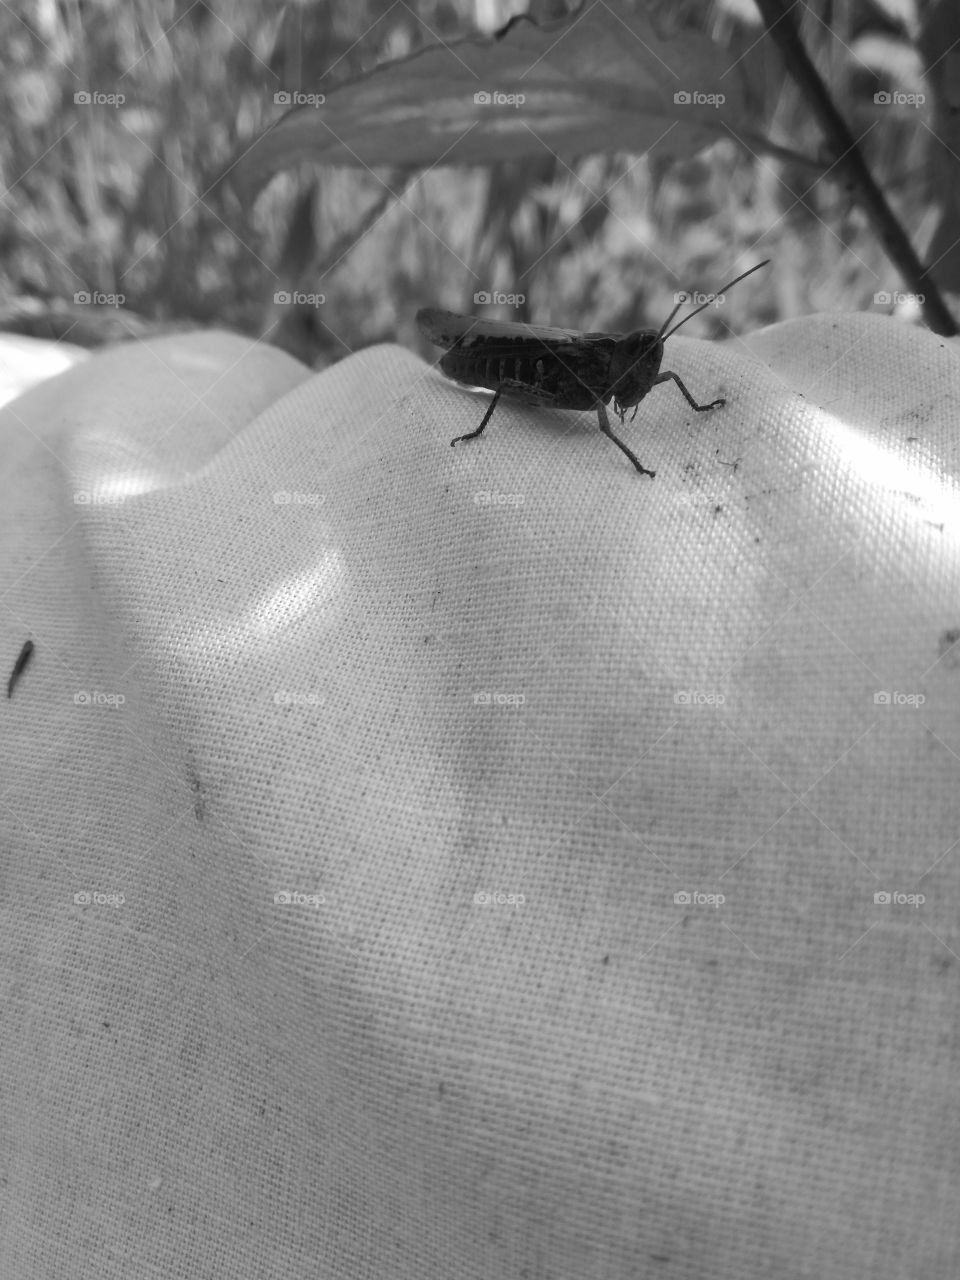 adult cricket in the wild monochrome